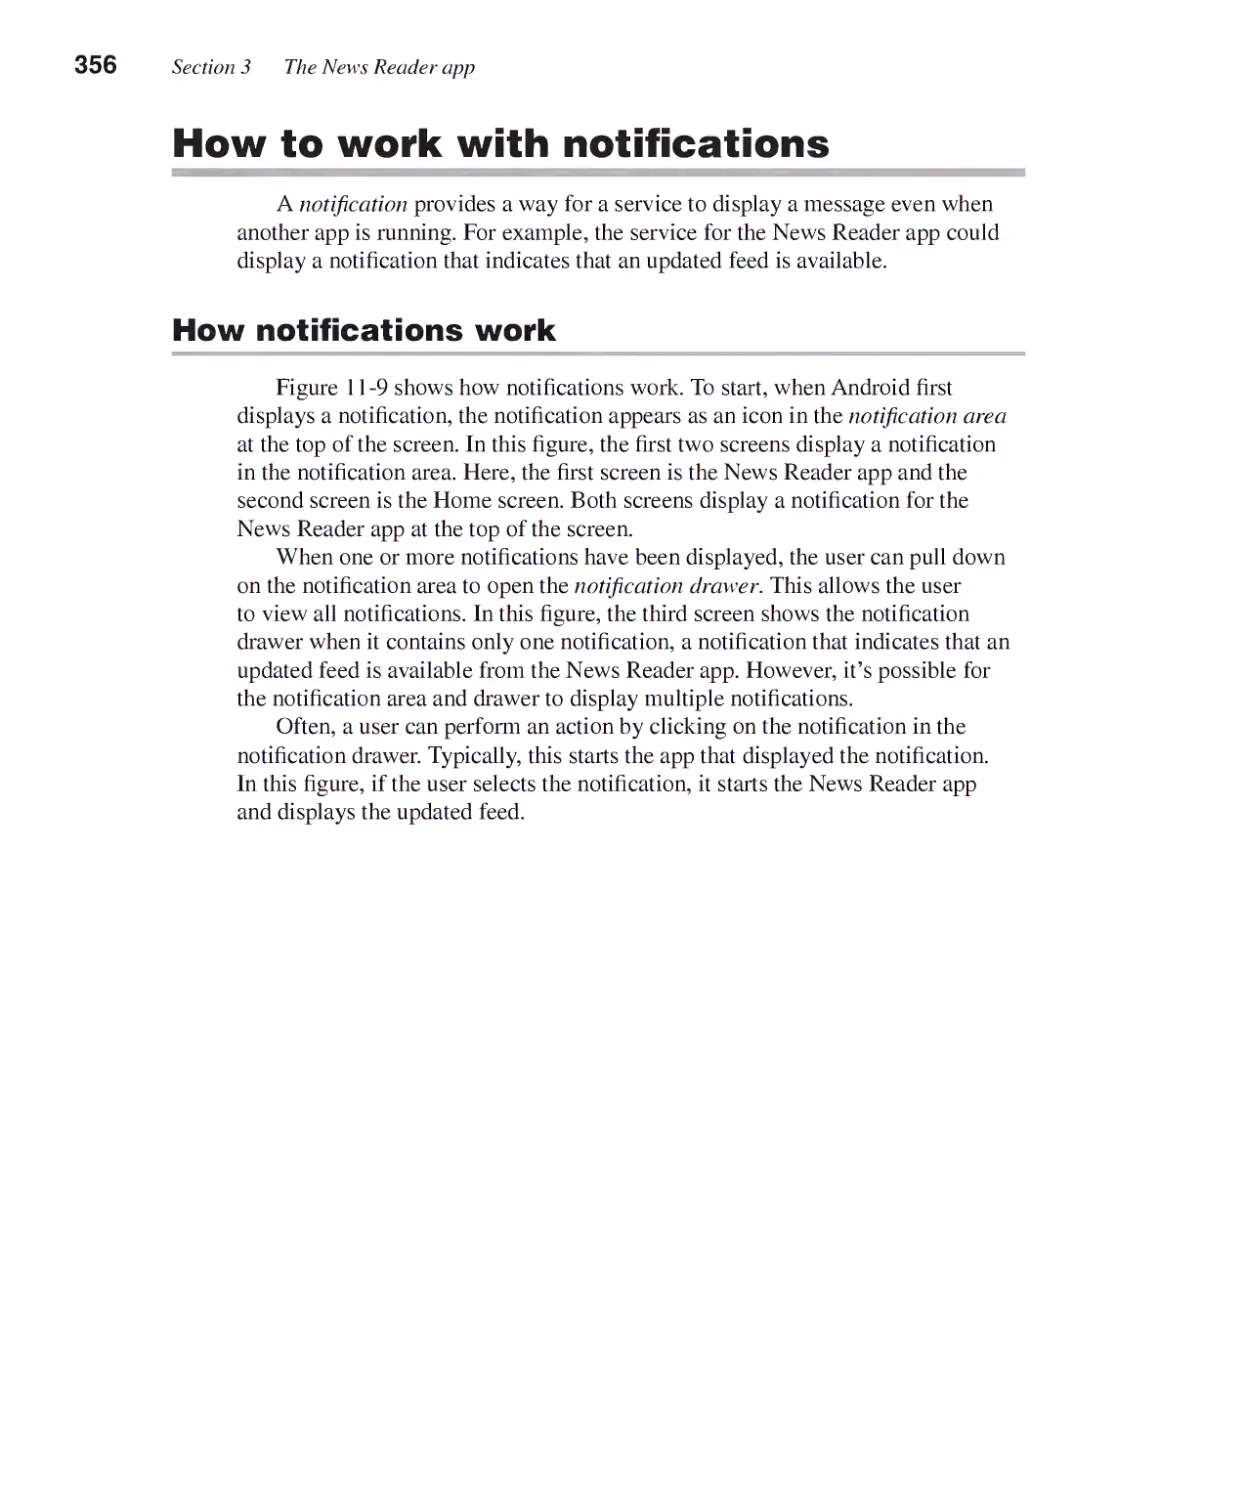 How to Work with Notifications